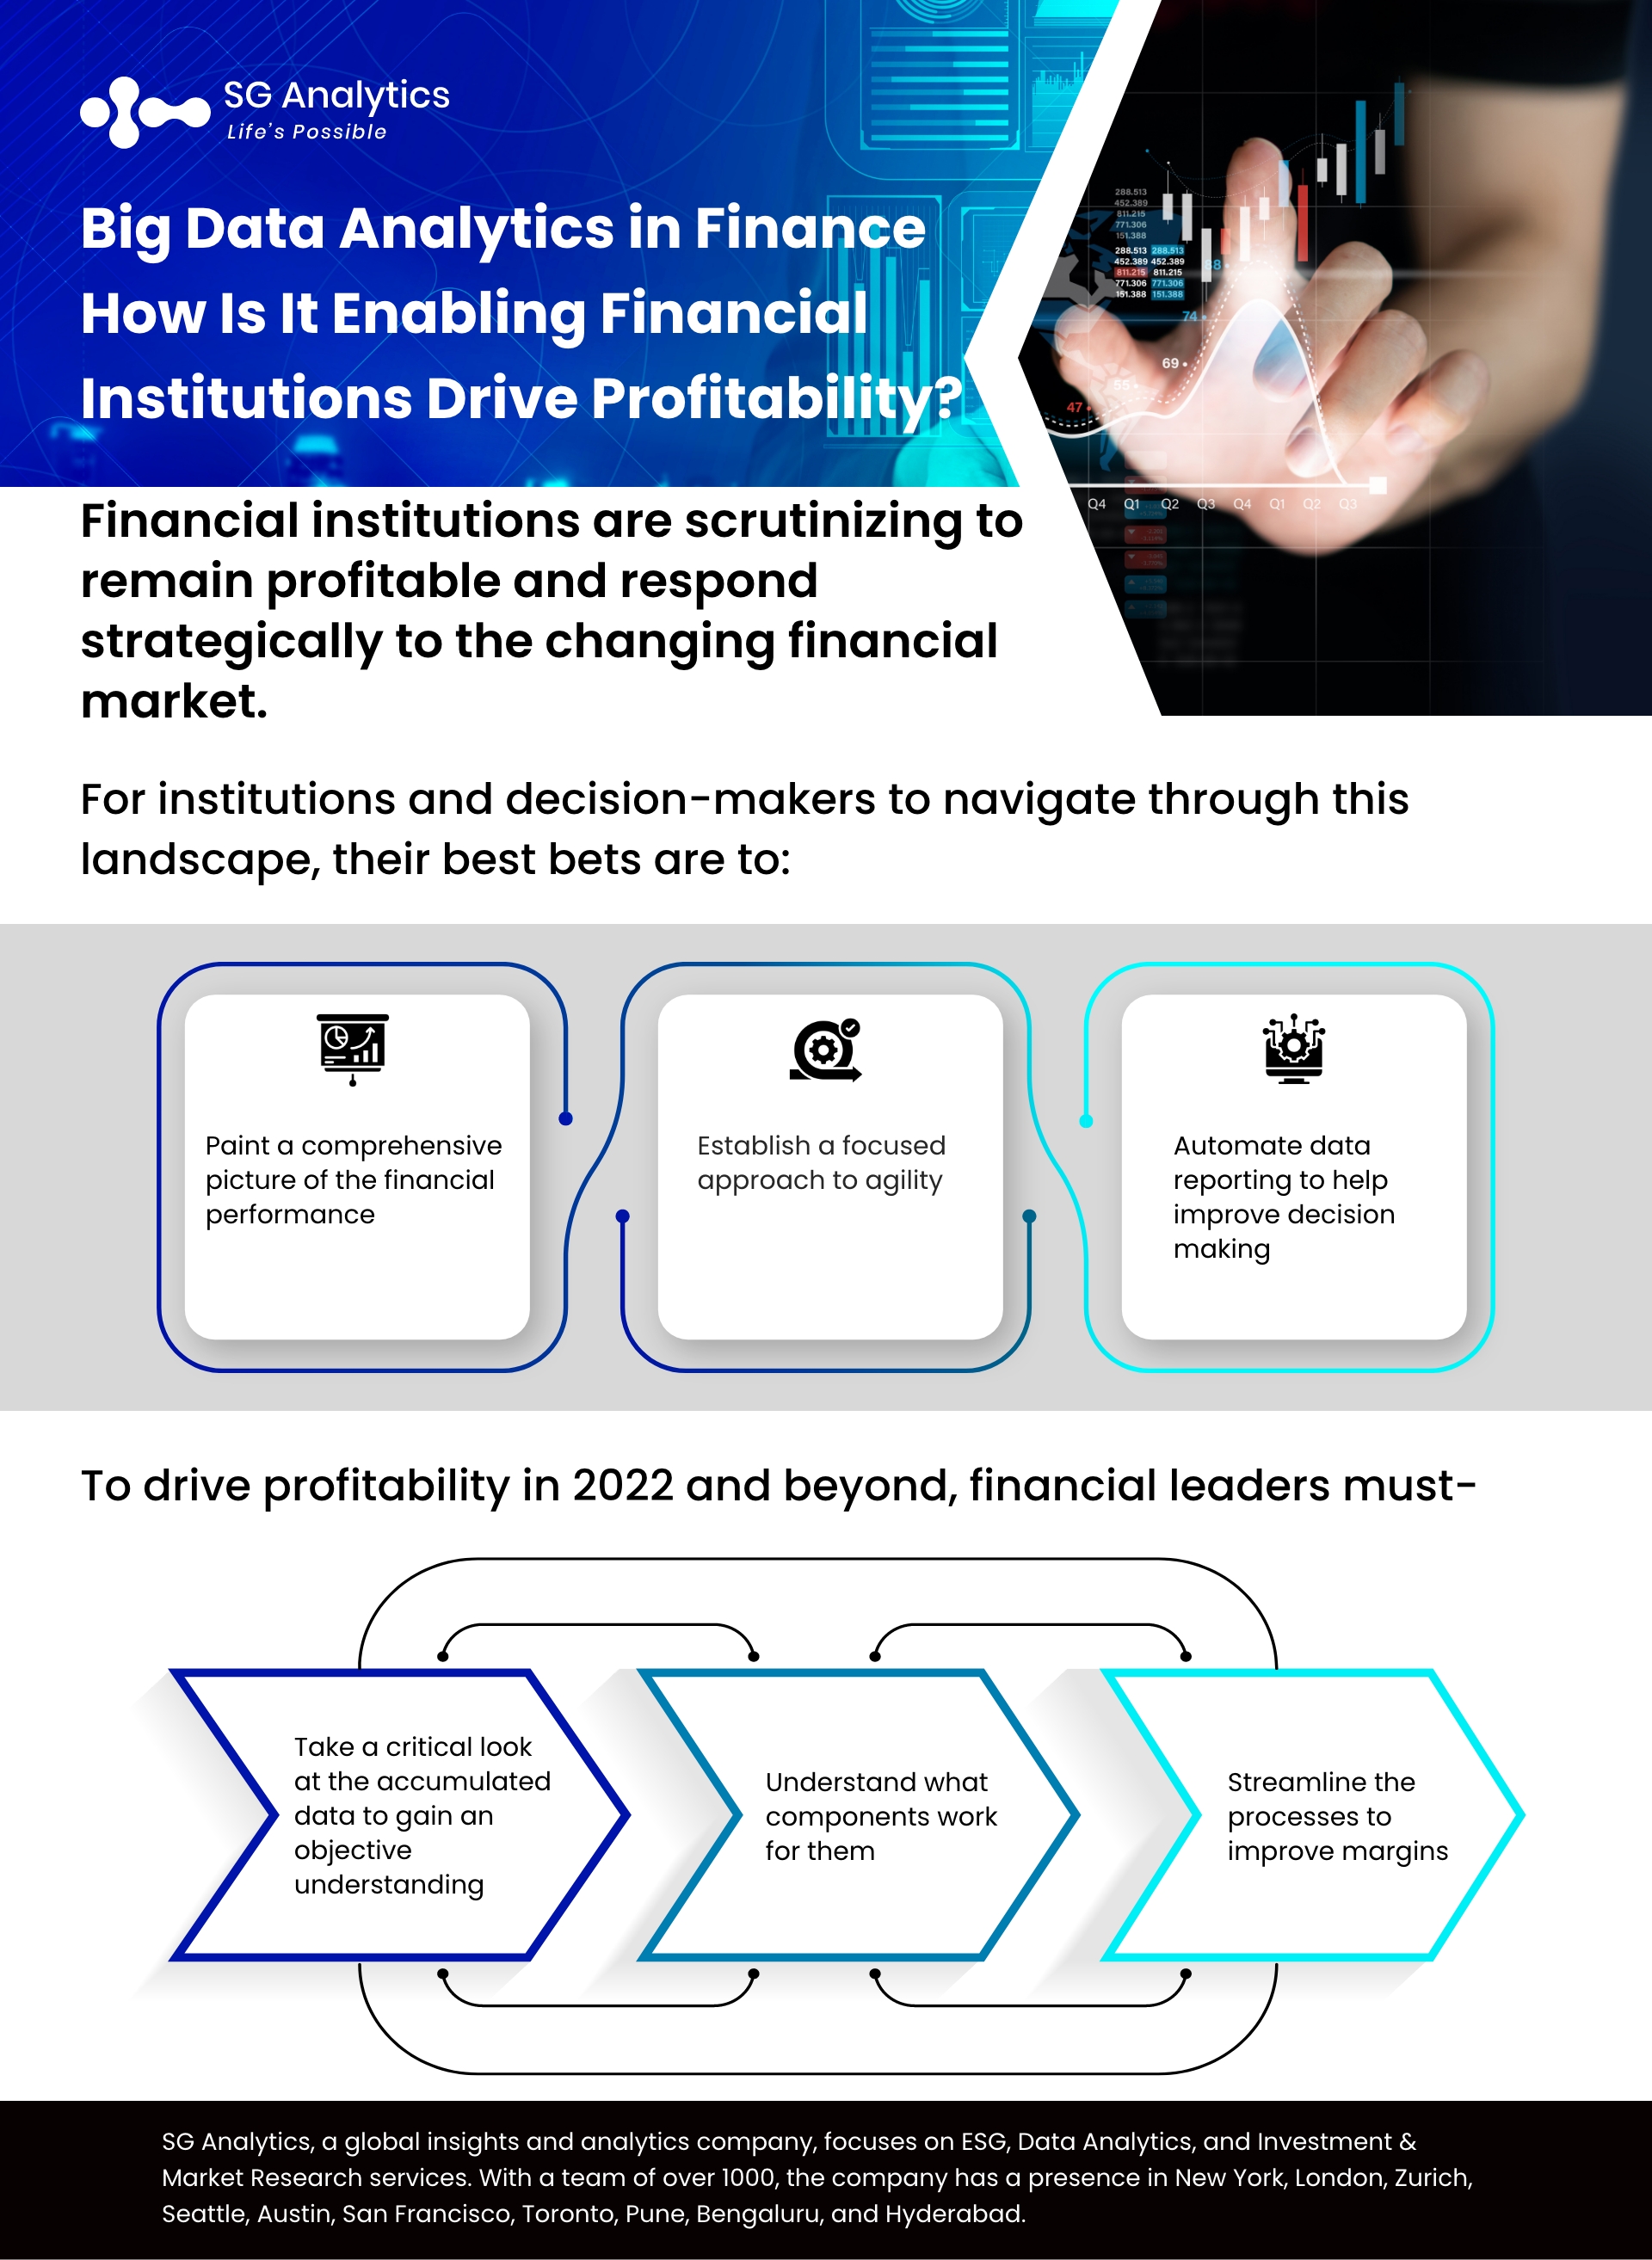 SG Analytics_Big Data Analytics in Finance - How Is it Enabling Financial Institutions to Drive Profitability